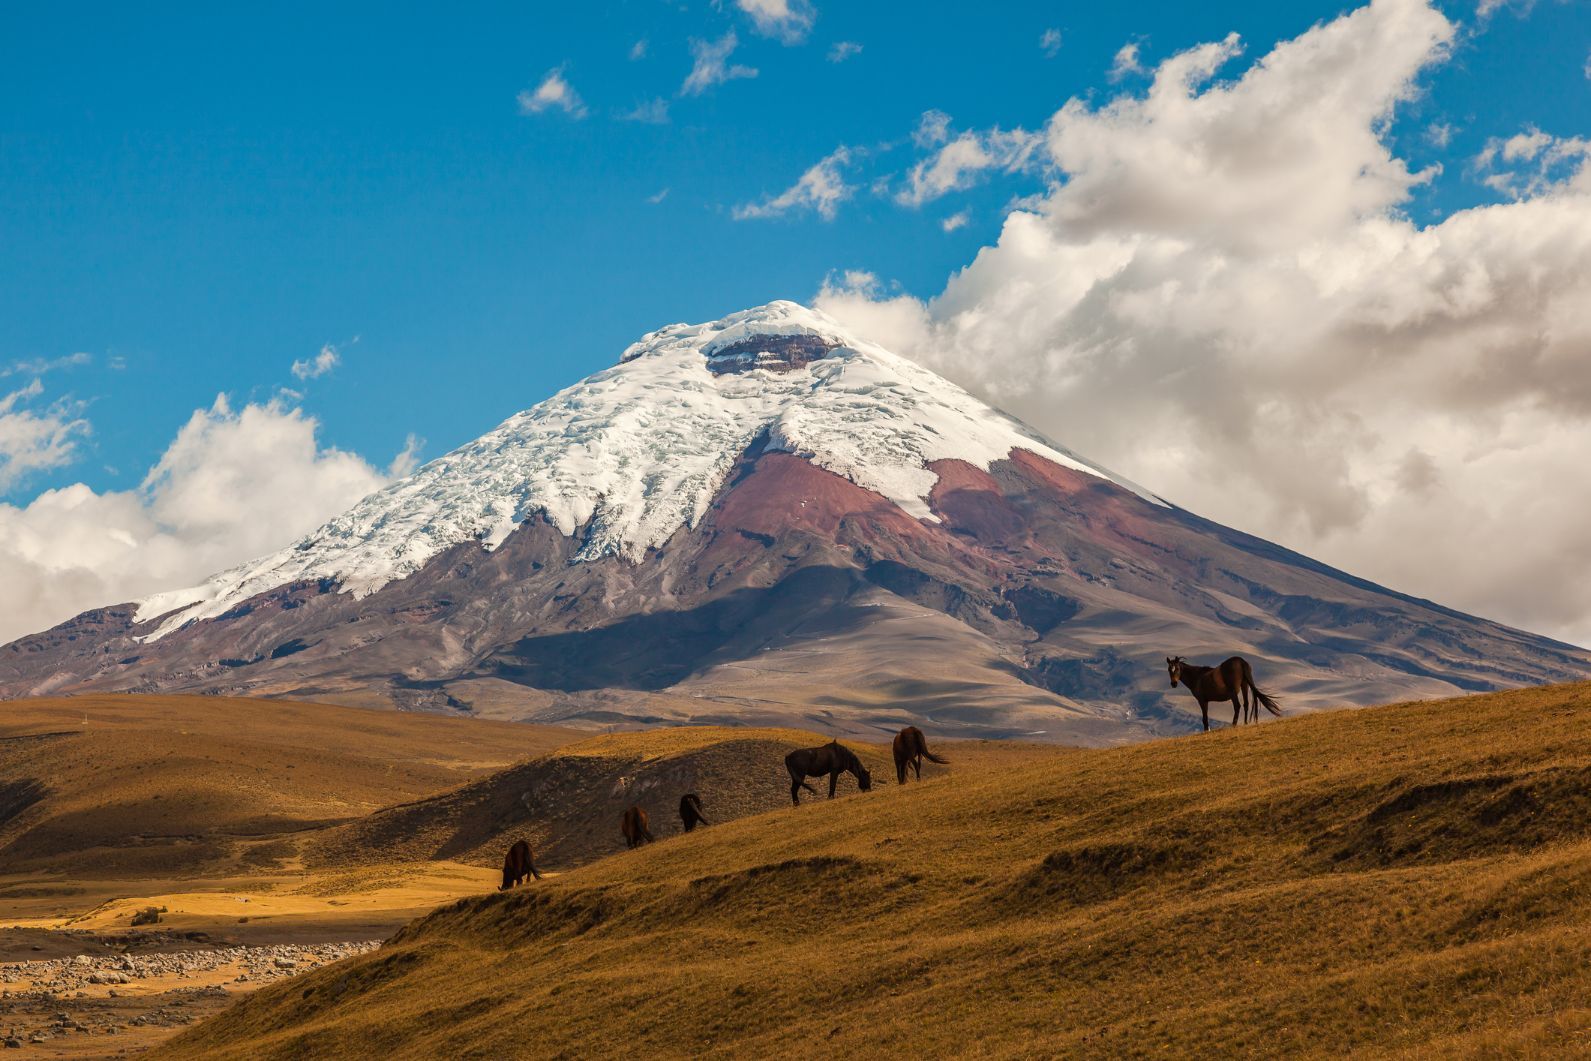 Horses silhouetted in front of the summit of Cotopaxi, a stratovolcano in Ecuador.